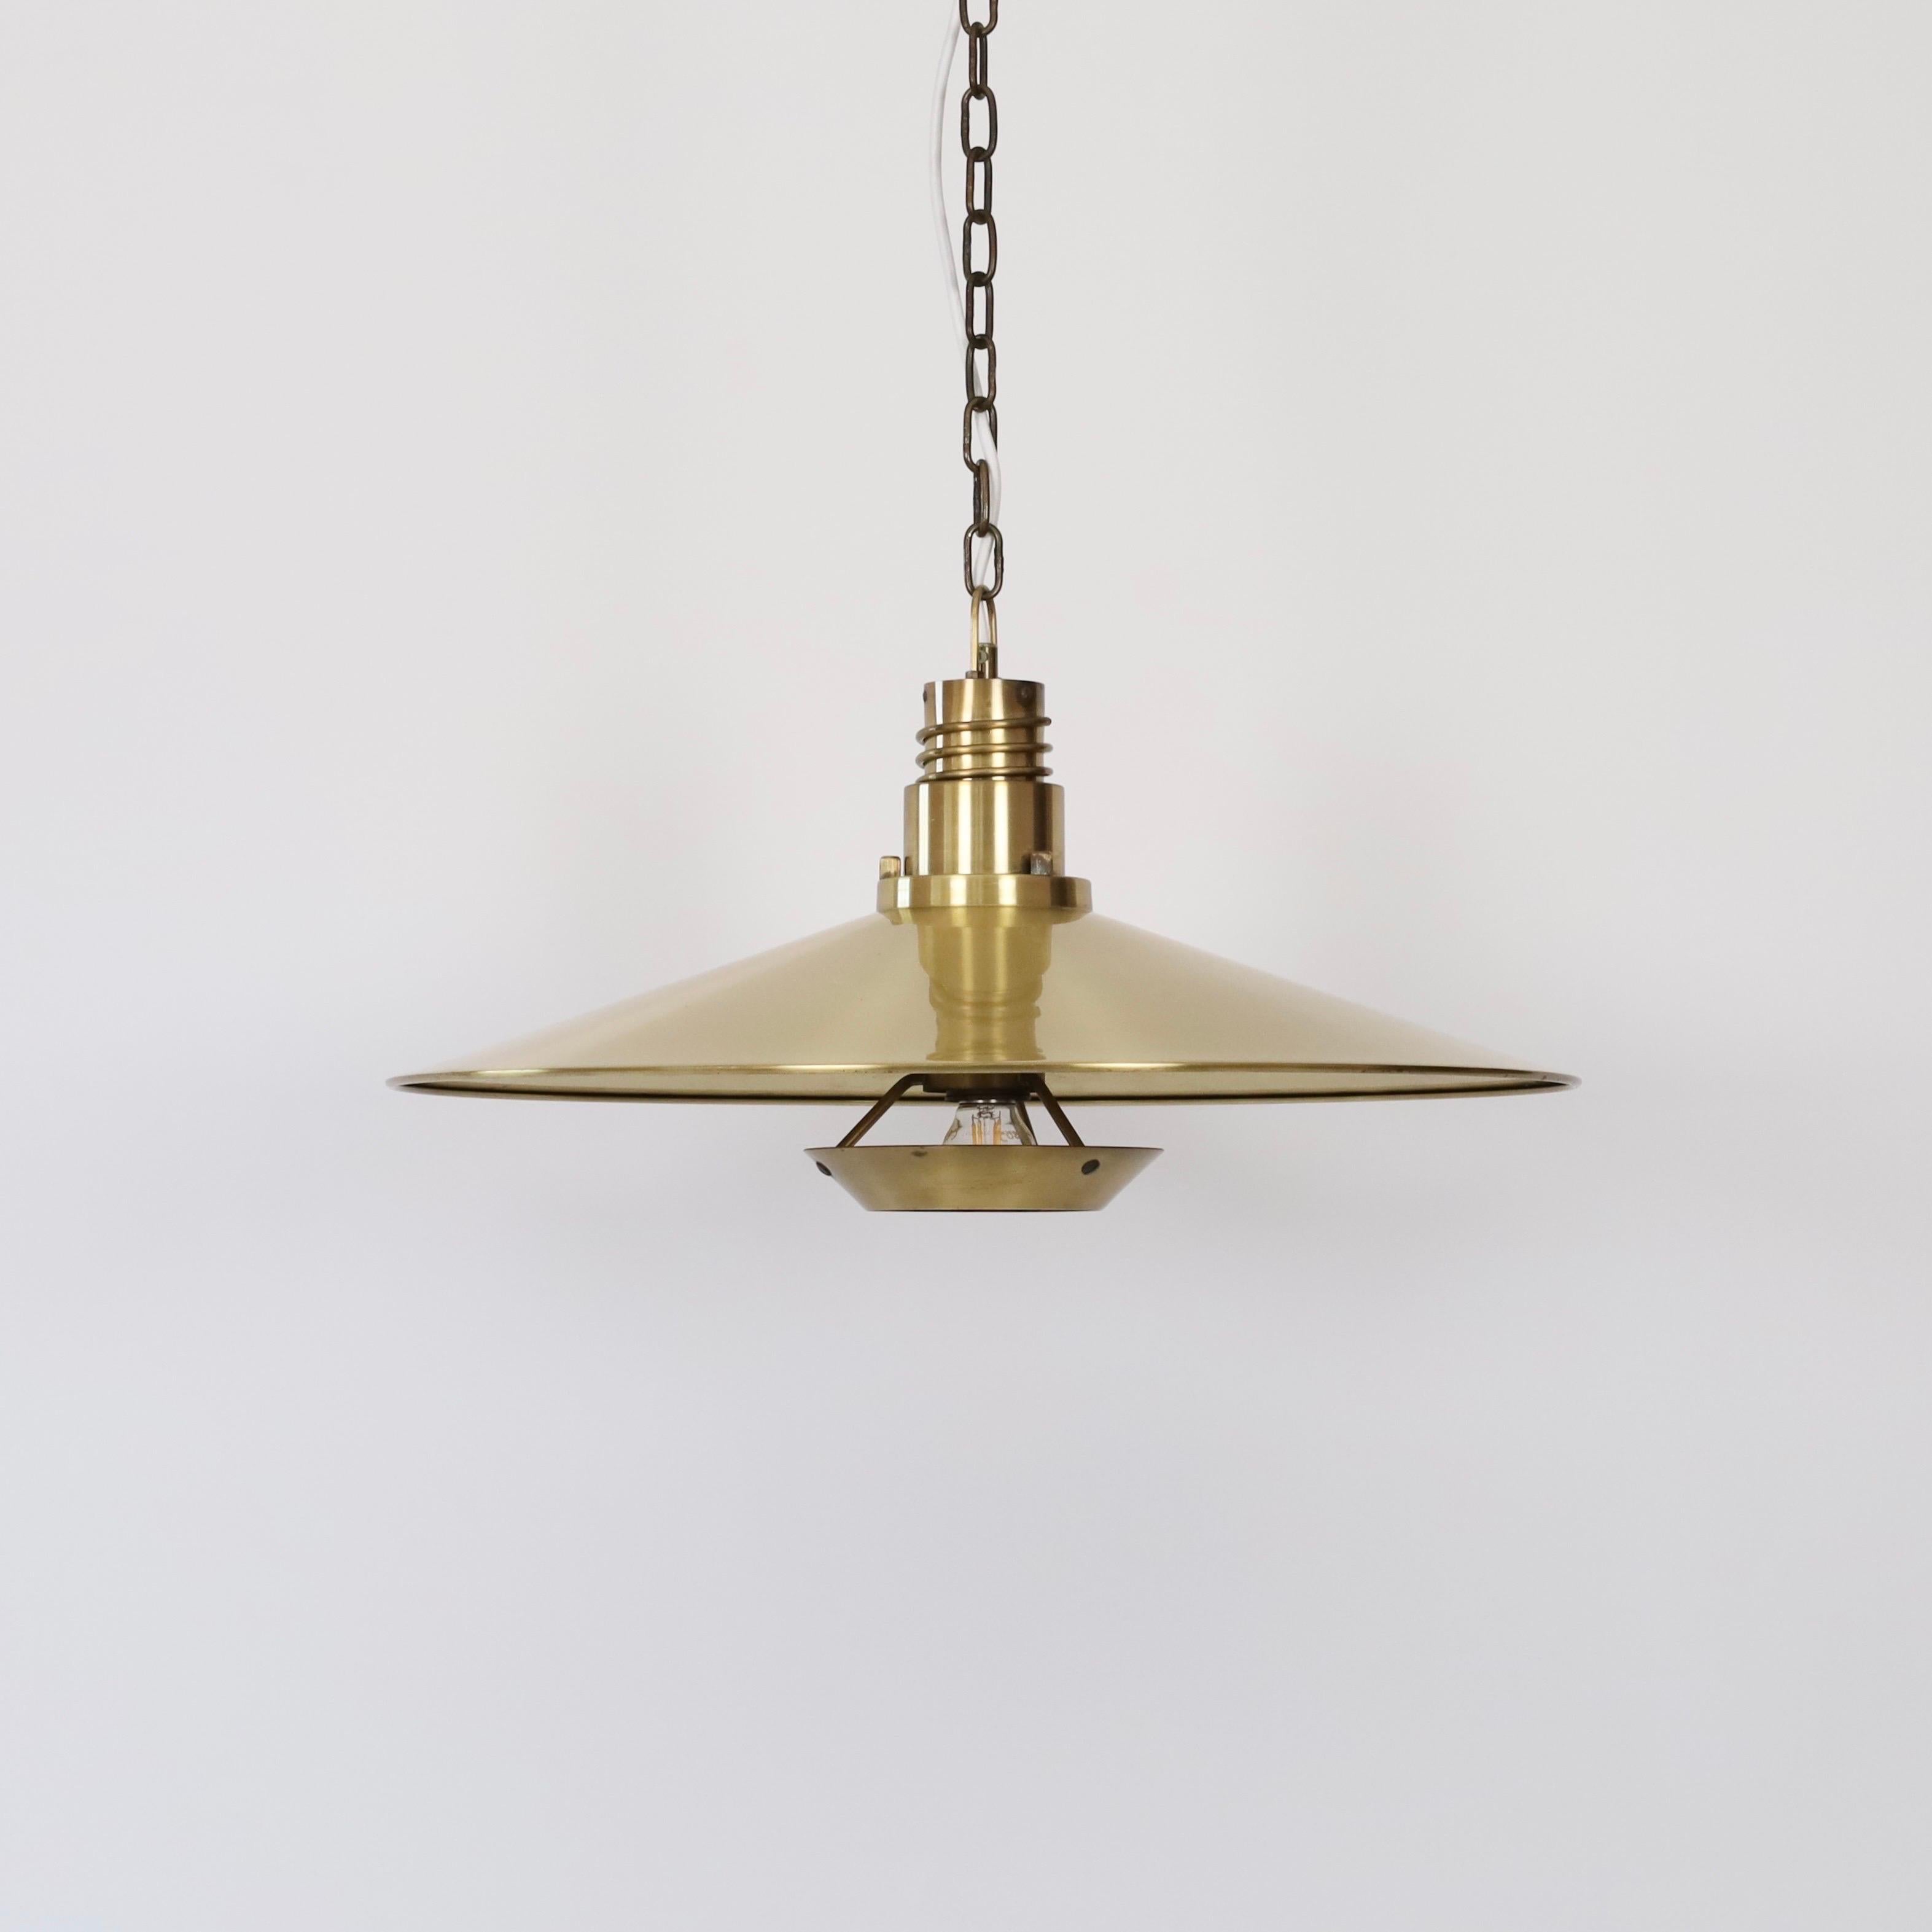 A brass pendant light made by Fog & Mørup in the 1960s. Substantial and impressive.

* A brass pendant light with adjustable positioning of the bulb and blinder
* Designer: Unknown
* Producer: Fog & Mørup Denmark
* Year: 1960s
* Condition: Good